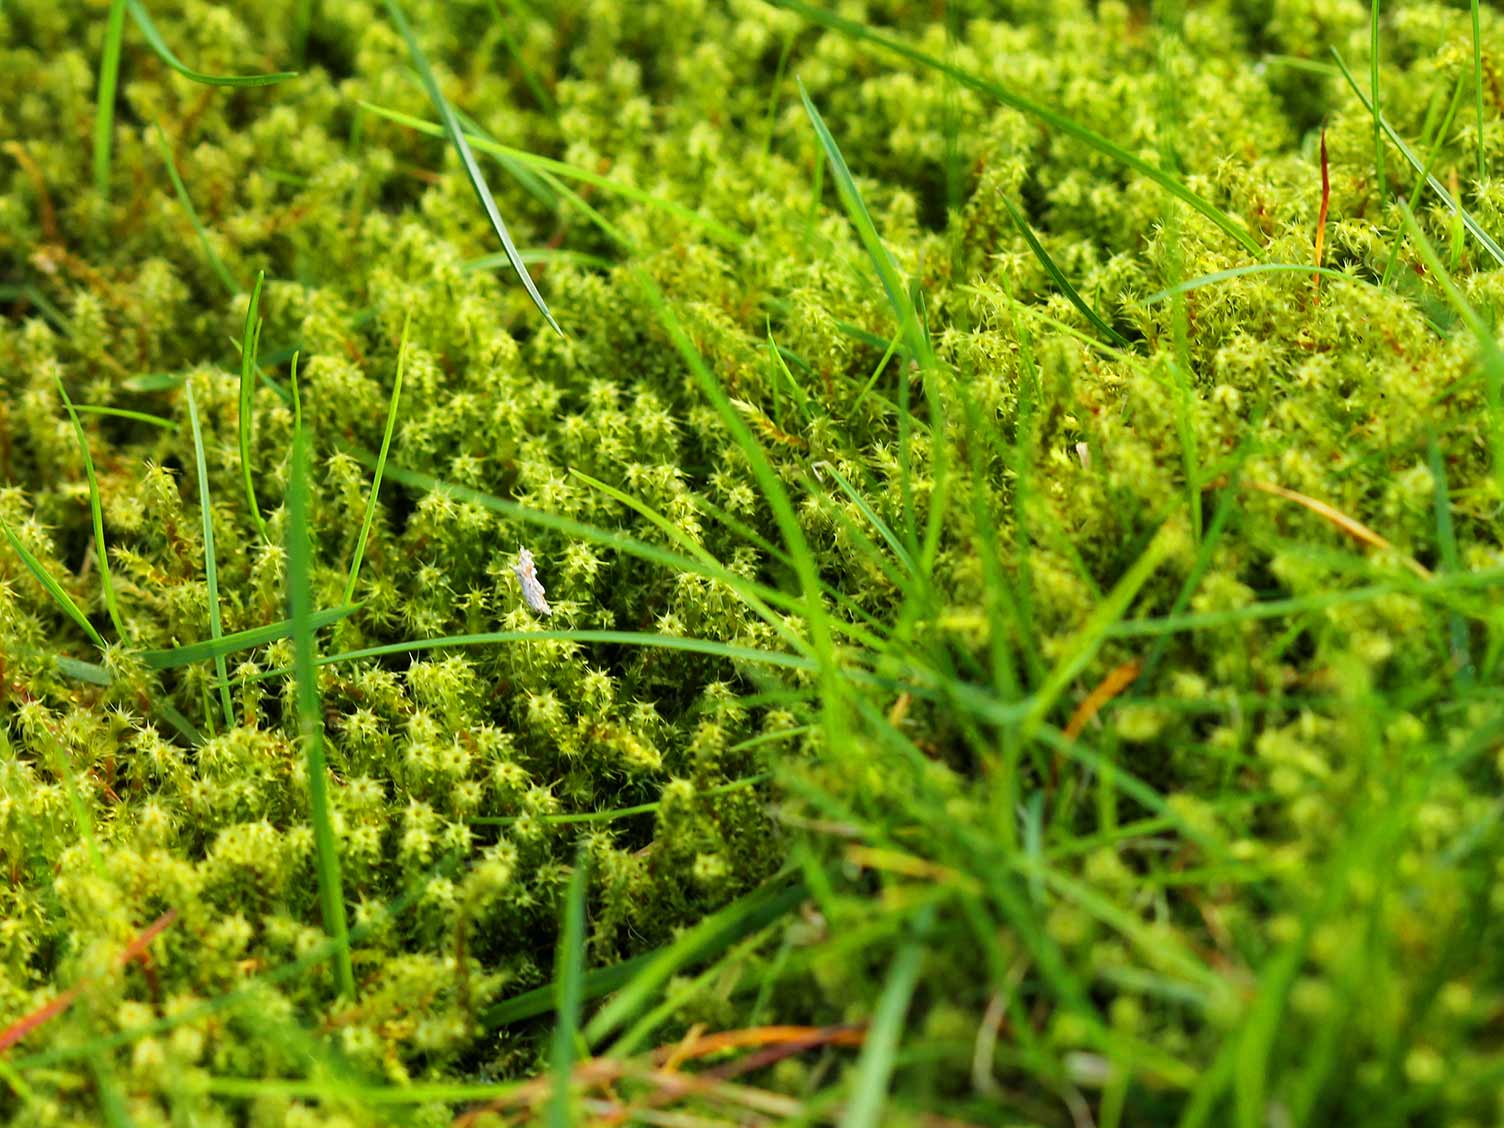 Moss control in lawns